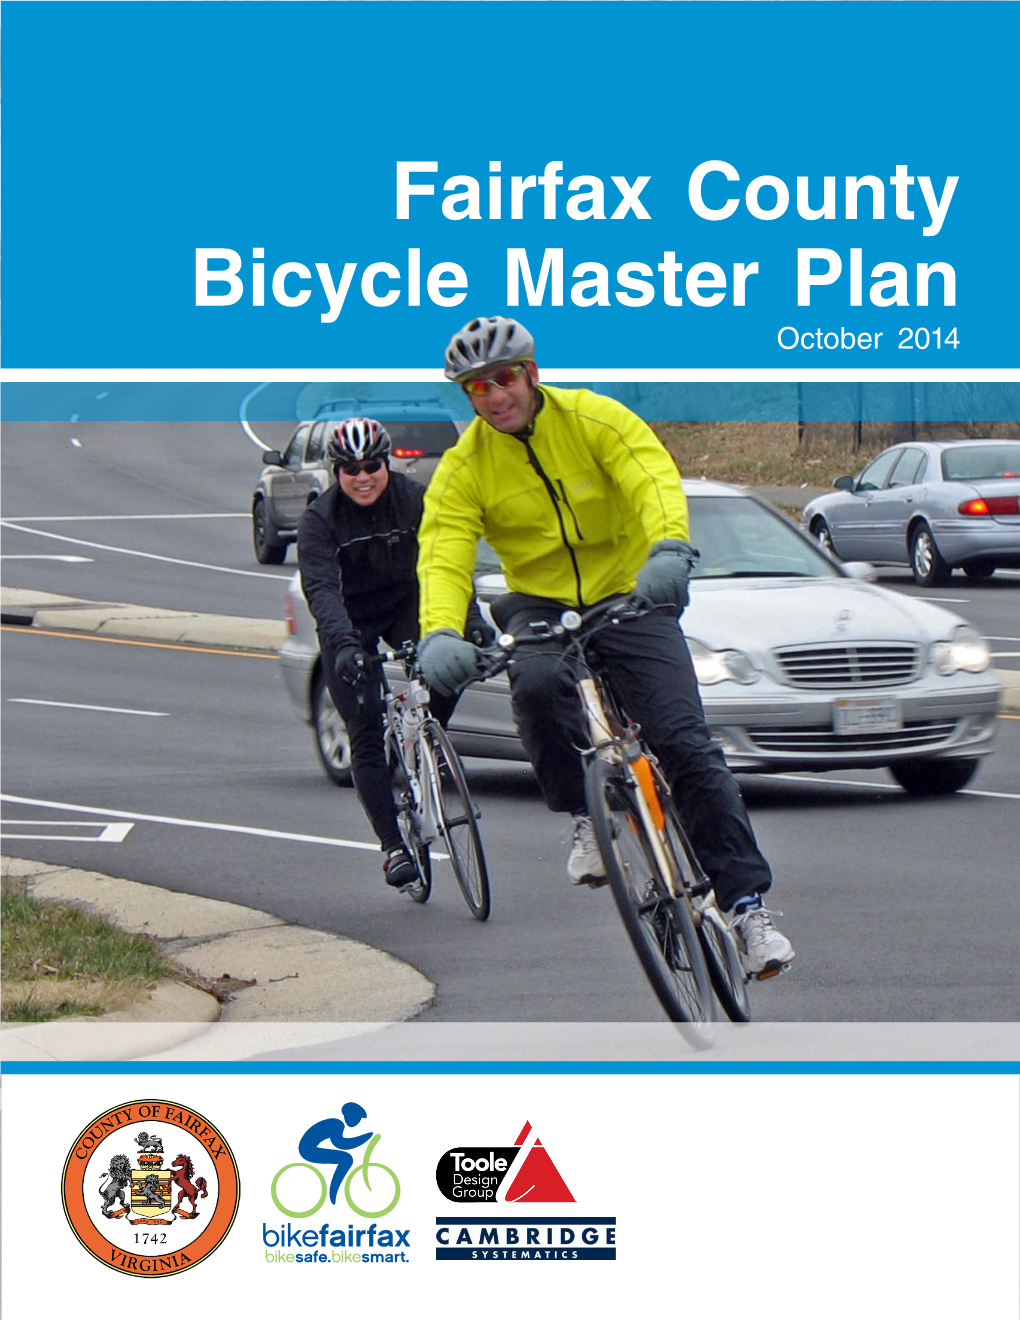 Fairfax County Bicycle Master Plan October 2014